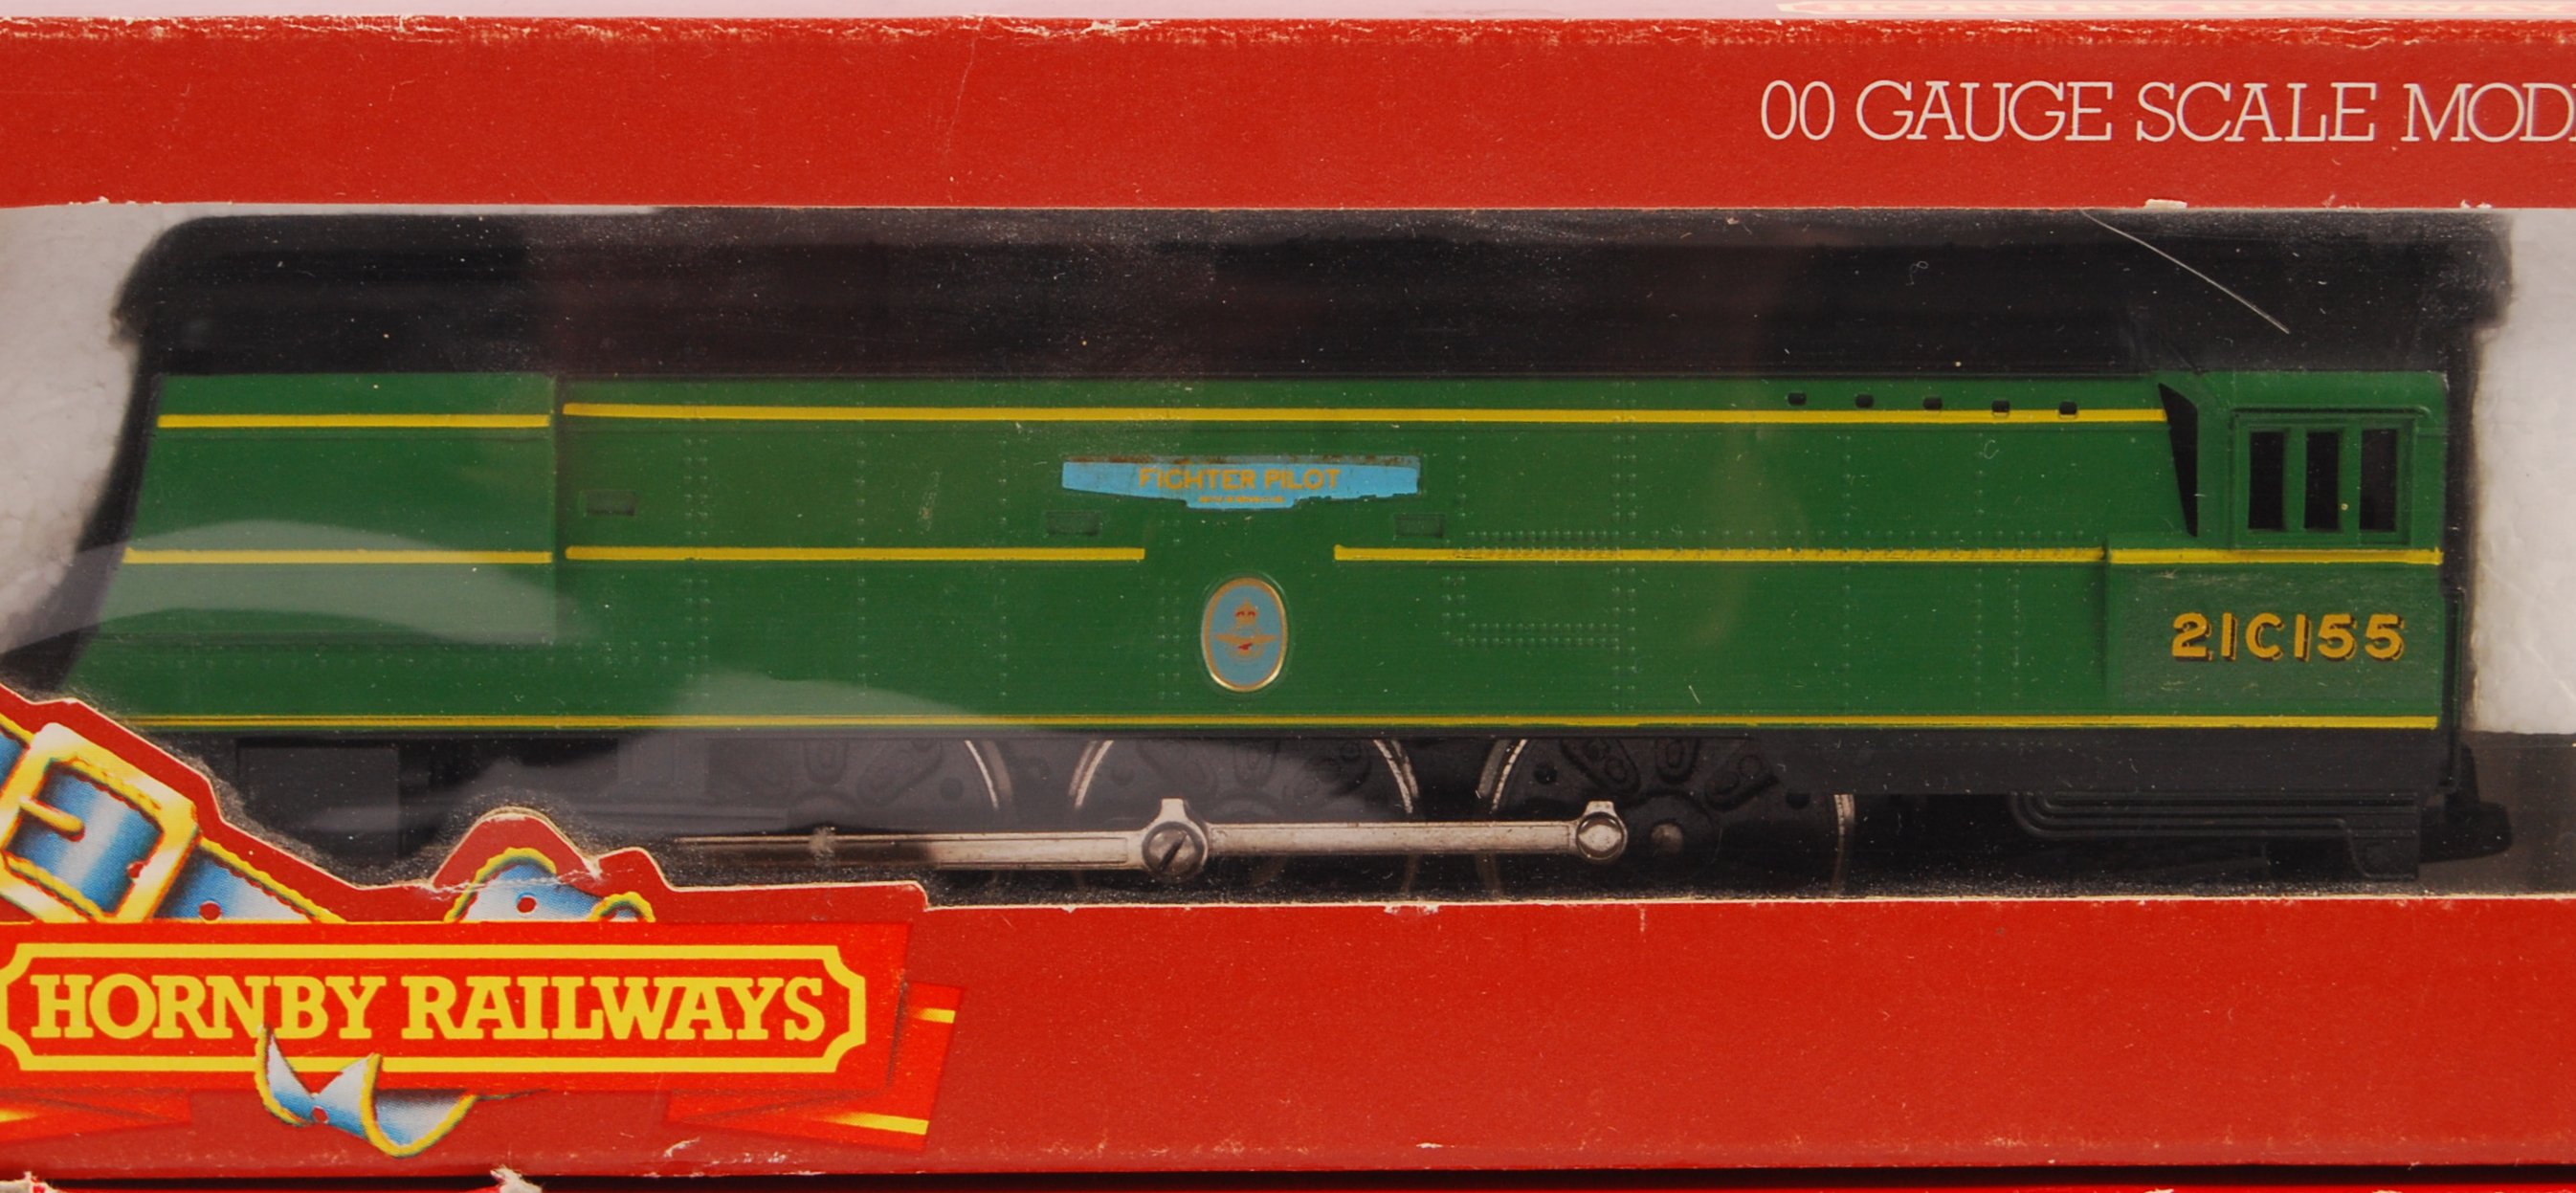 TWO HORNBY 00 GAUGE BATTLE OF BRITAIN CLASS LOCOMOTIVES - Image 4 of 6